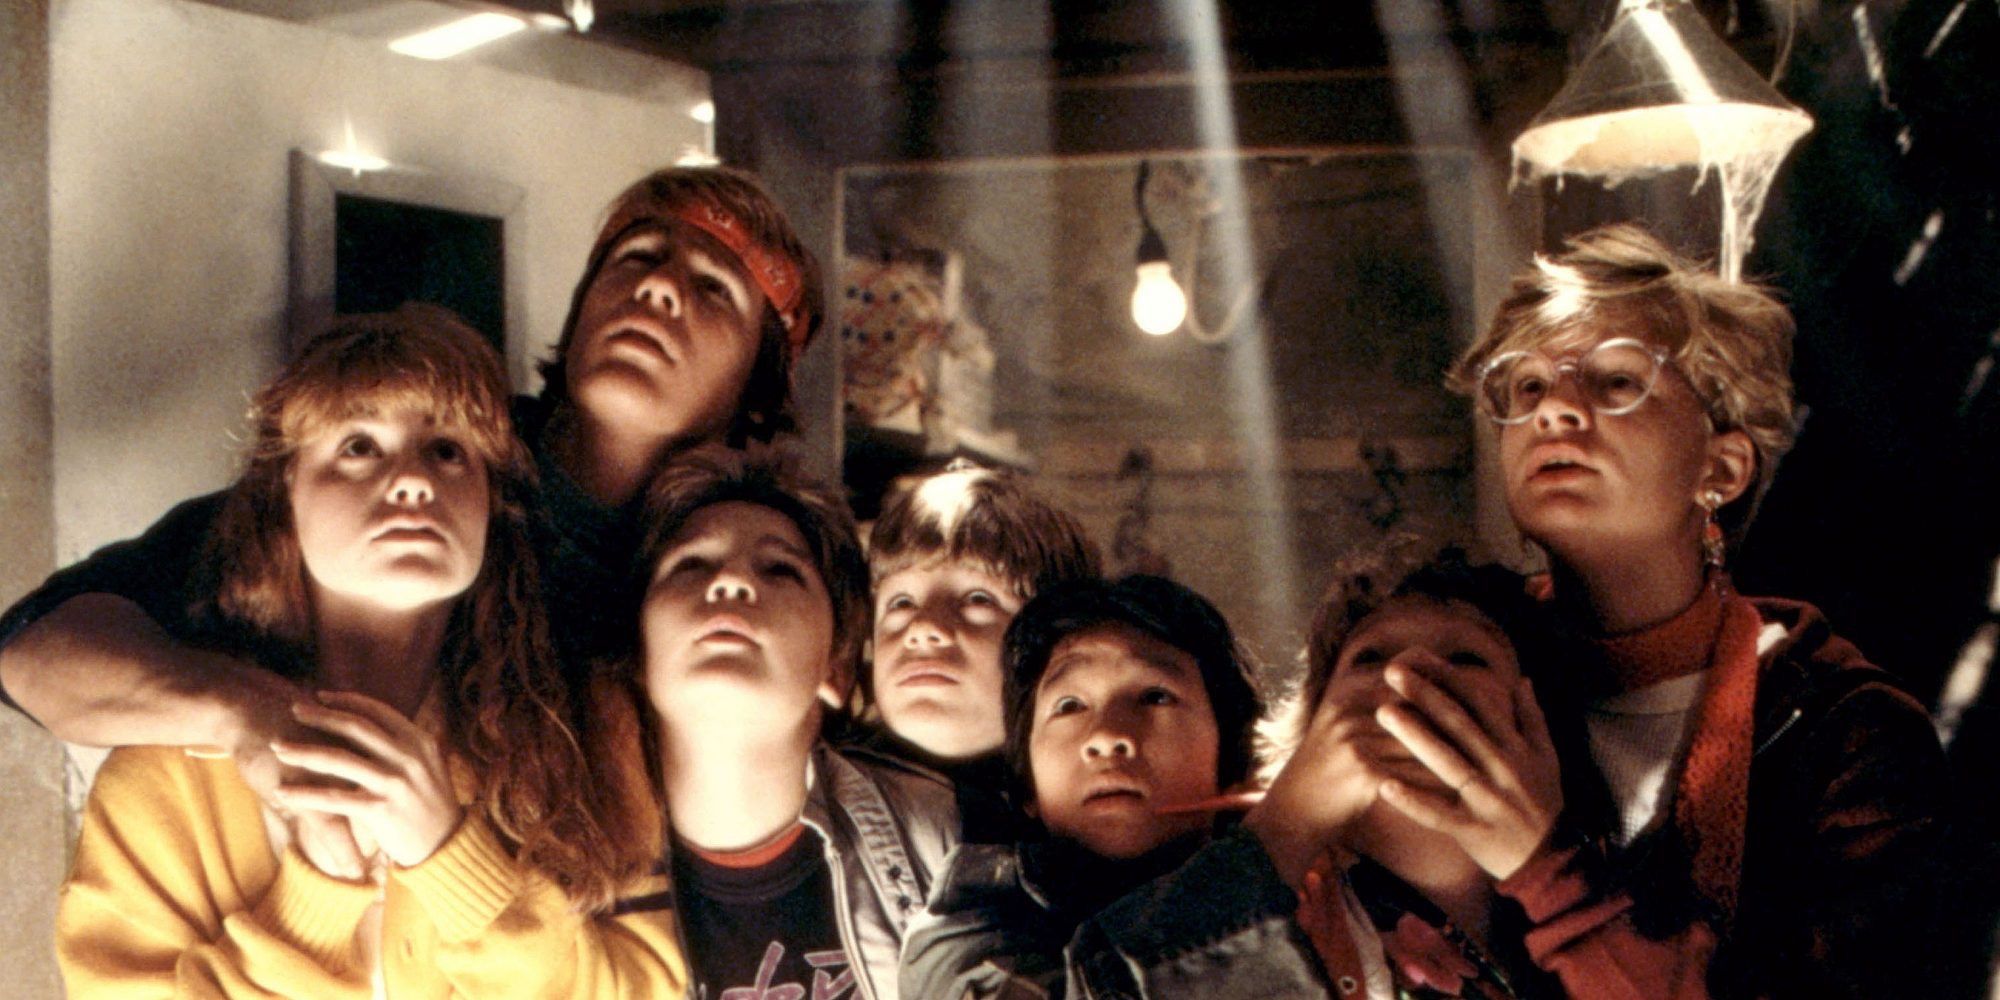 The cast of 'The Goonies' staring at the ceiling